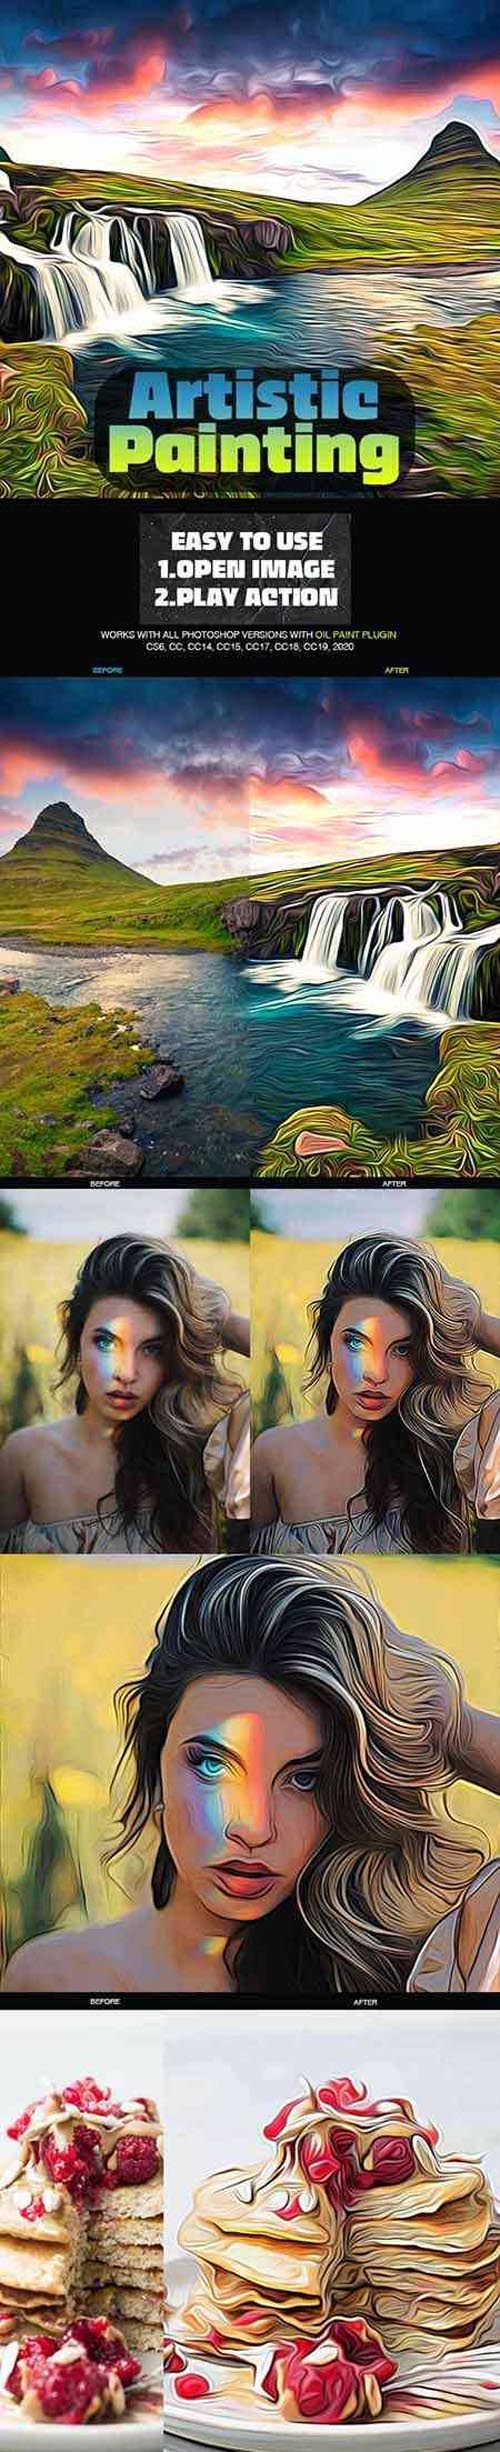 Artistic Painting Photoshop Action 26590064